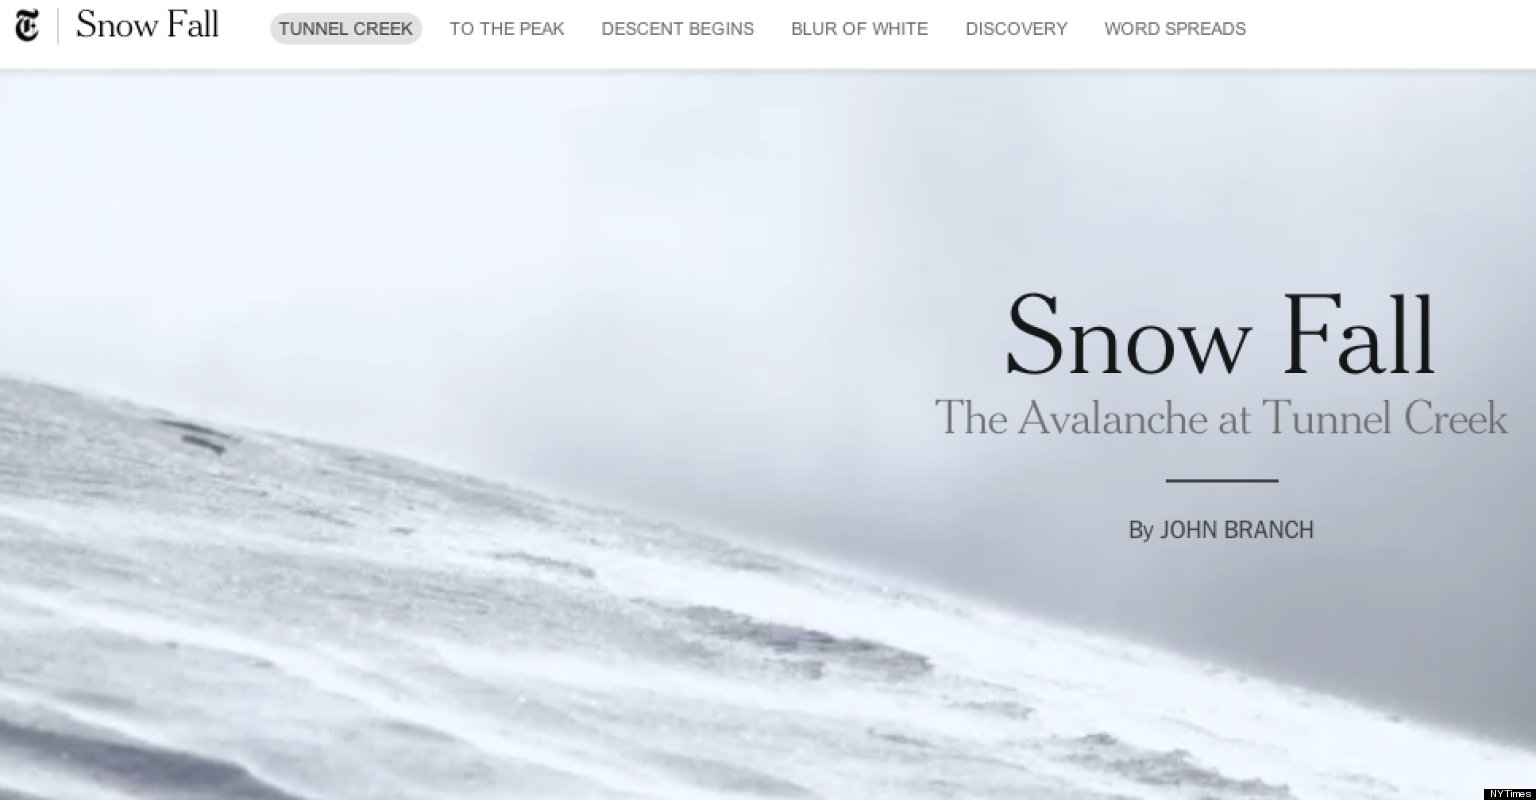 The New York Times story Snow Fall was considered a breakthrough in interactive, multimedia rich web design.